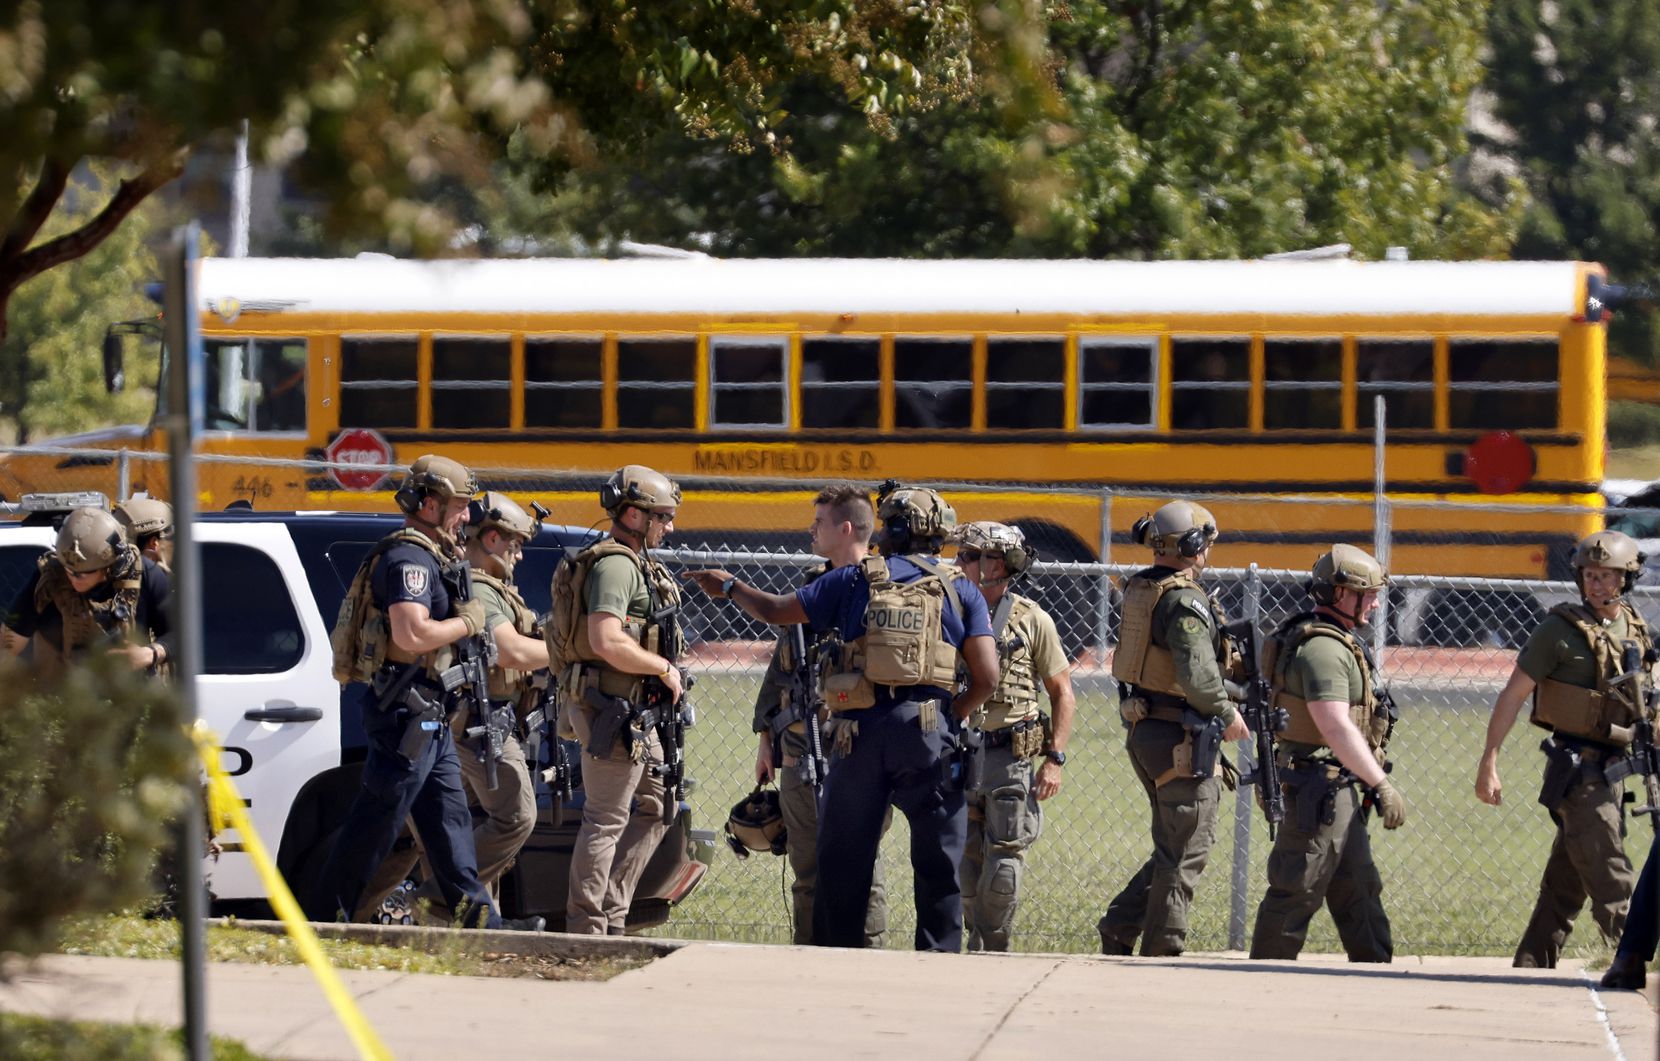 Tactical officers clear the scene following a shooting inside Mansfield Timberview High School in Arlington, Texas, Wednesday, October 6, 2021. Four people were injured in the shooting and the suspect turned himself into the Arlington police. (Tom Fox/The Dallas Morning News)